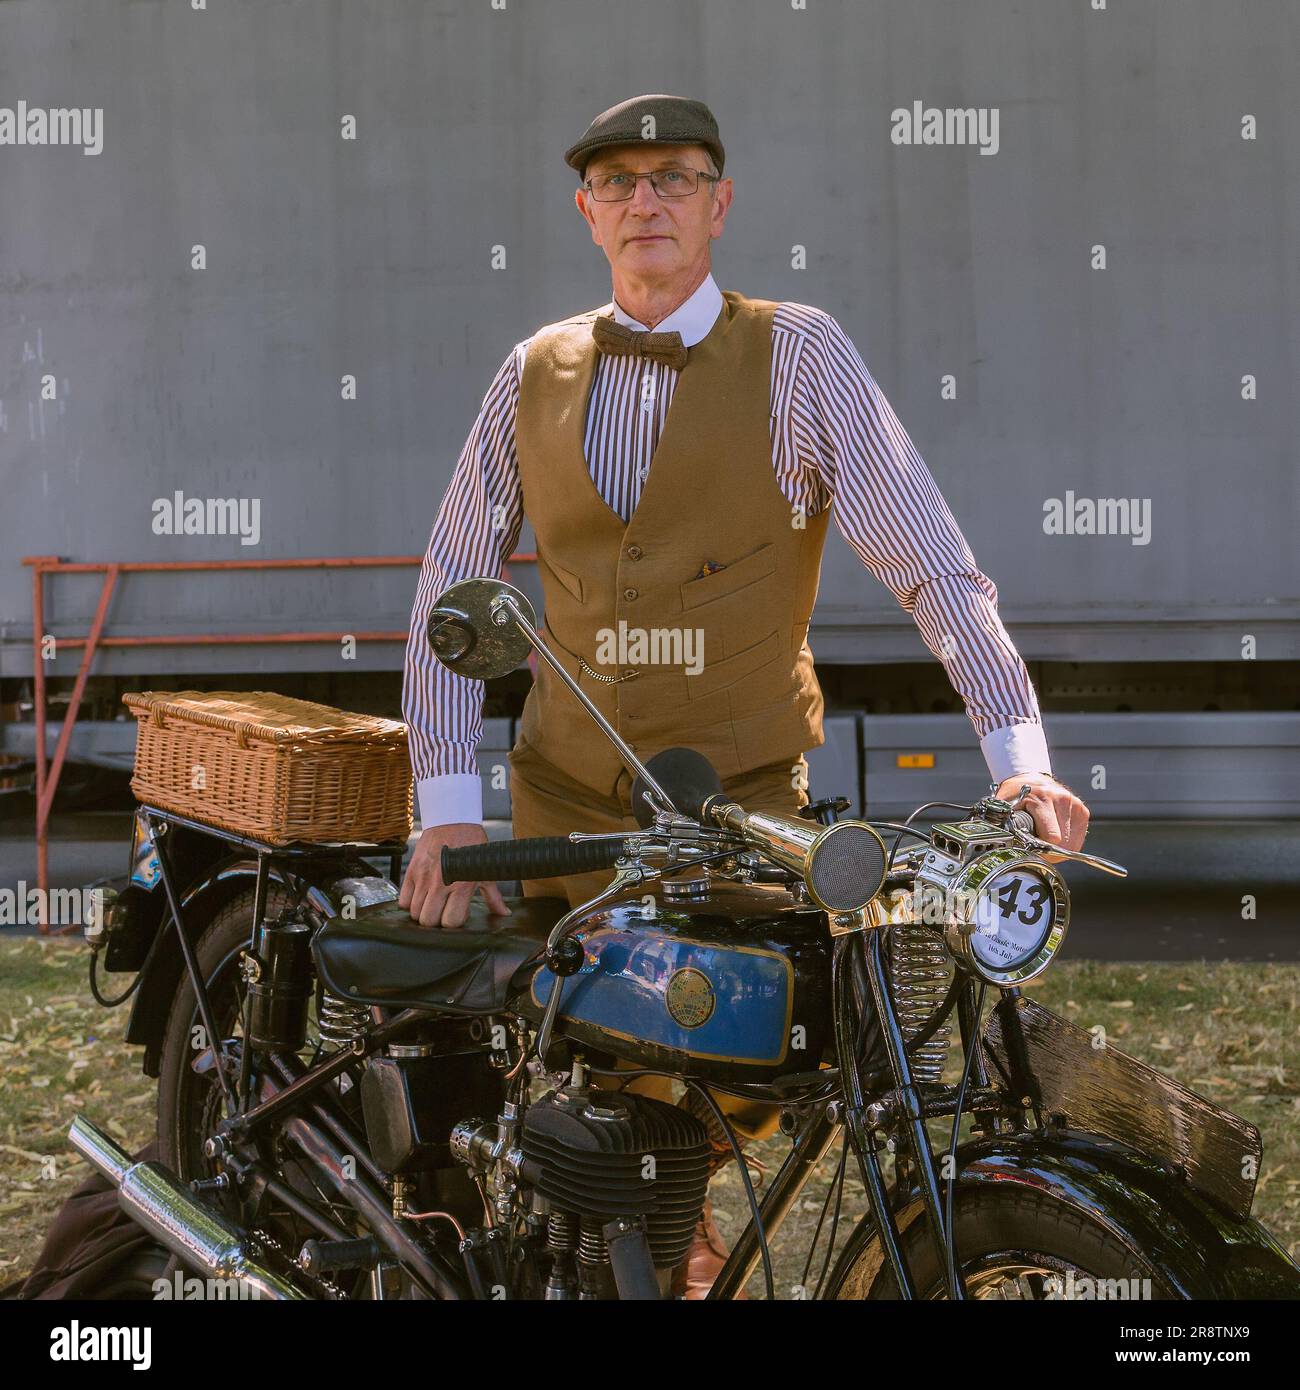 A portrait of the proud owner of a Triumph Model NSD motorcycle standing next to his motorbike while dressed in period costume. Vintage motorcycle. Stock Photo